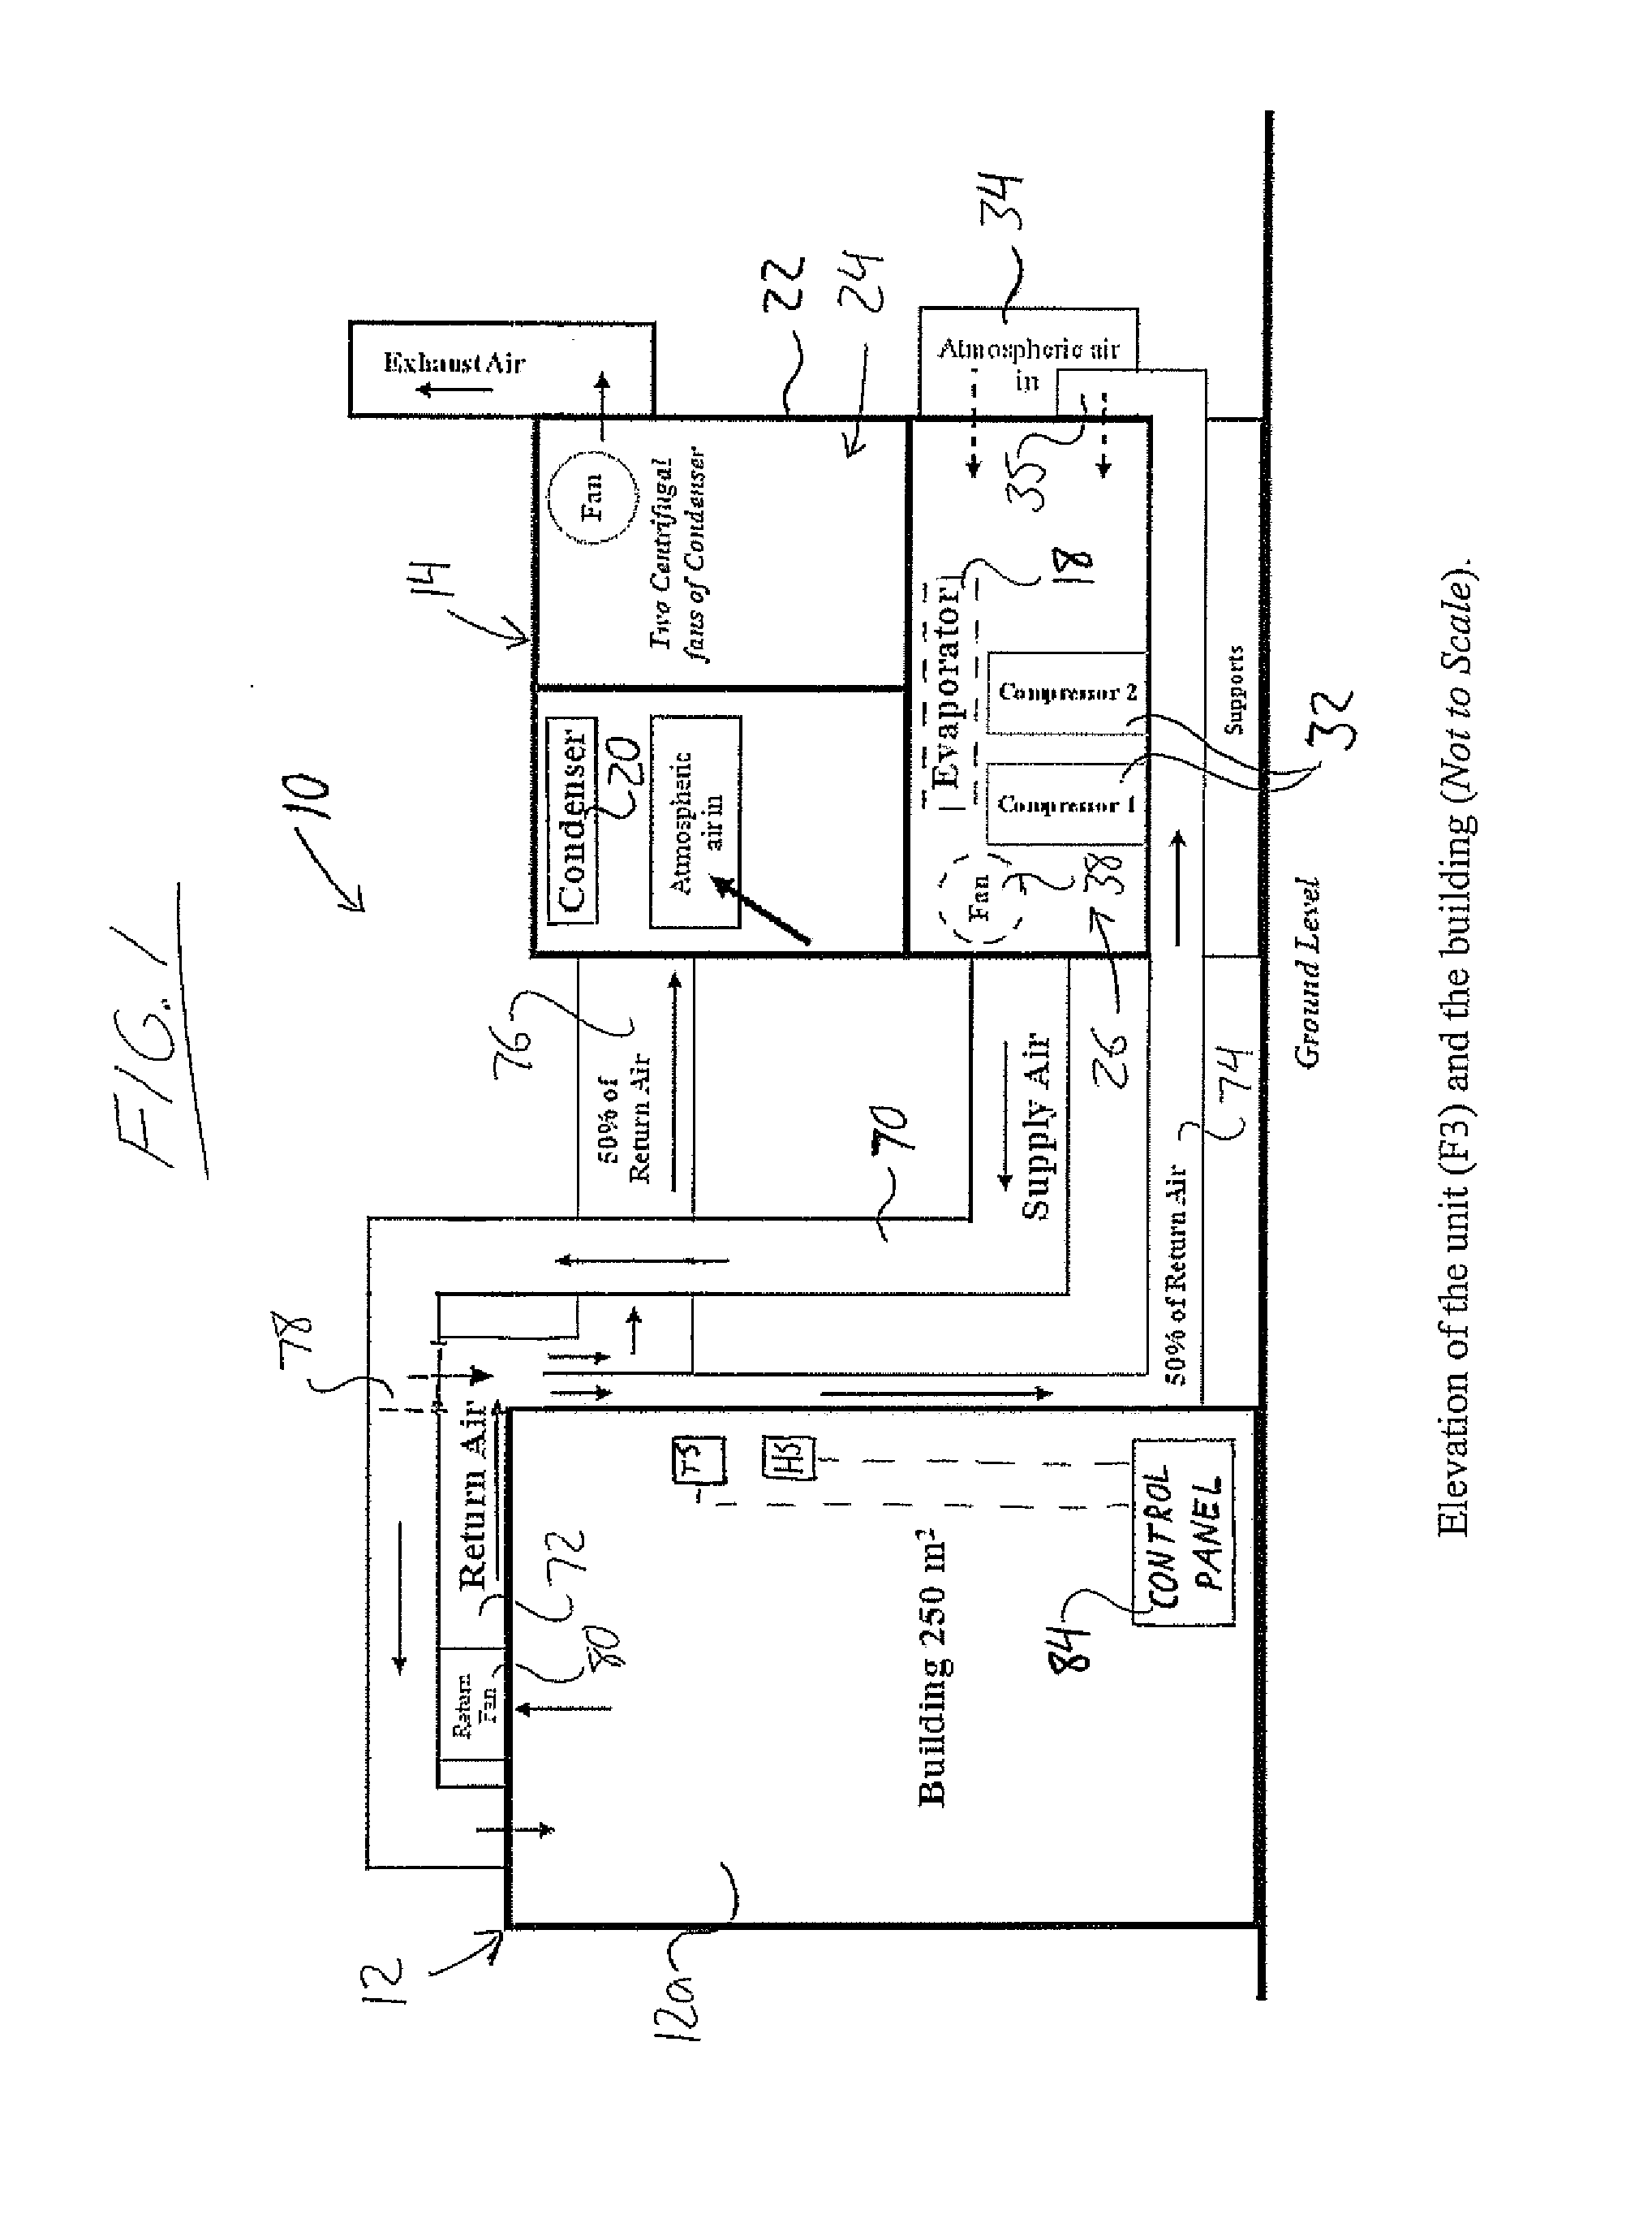 Combined Air Conditioning and Water Generating System